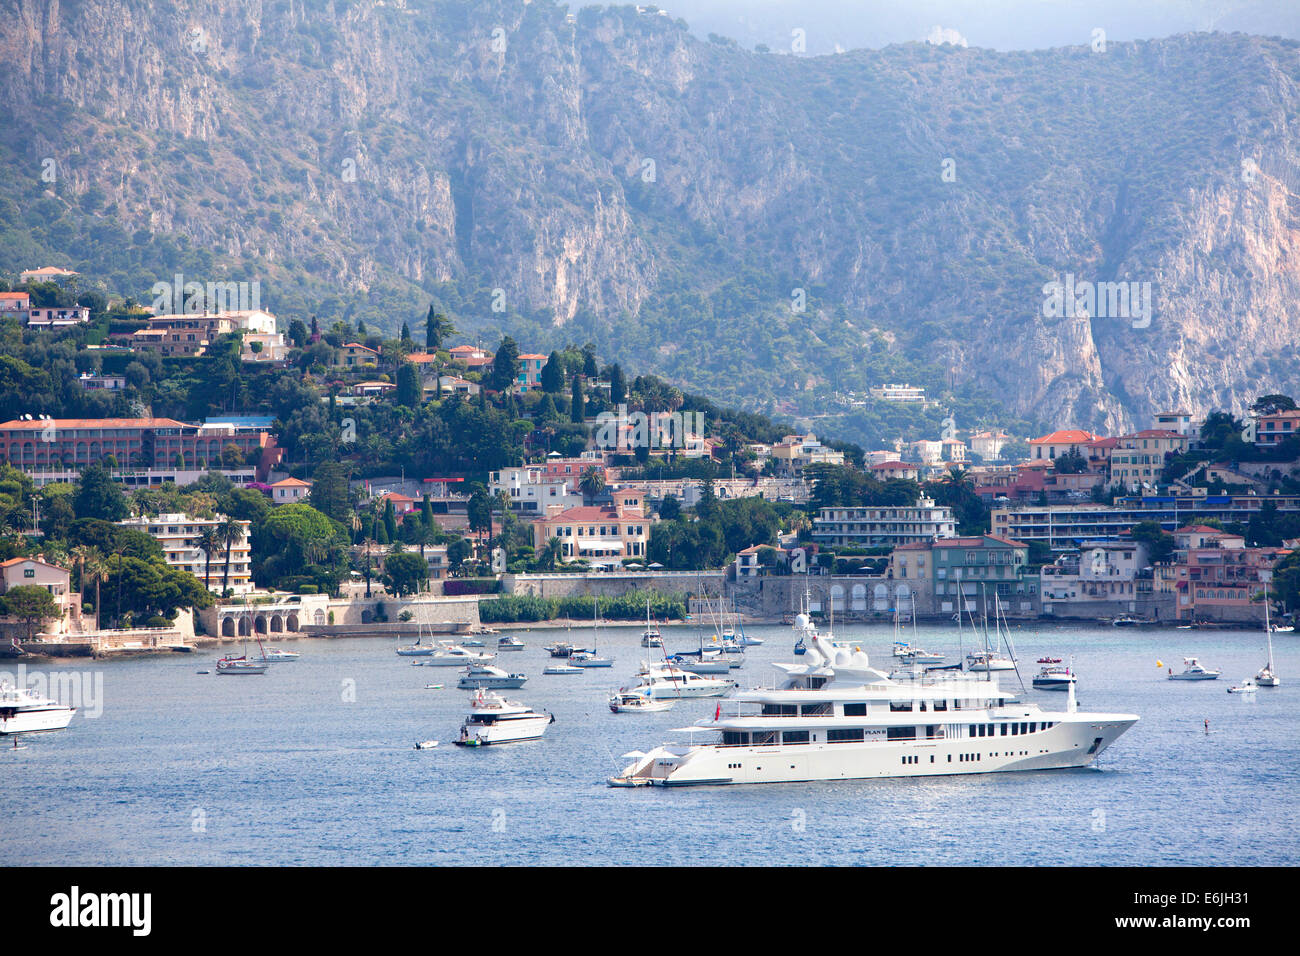 Yachts at Villefranche sur Mer in the Provence-Alpes Cote d'Azur region on the French Riviera, Nice Stock Photo